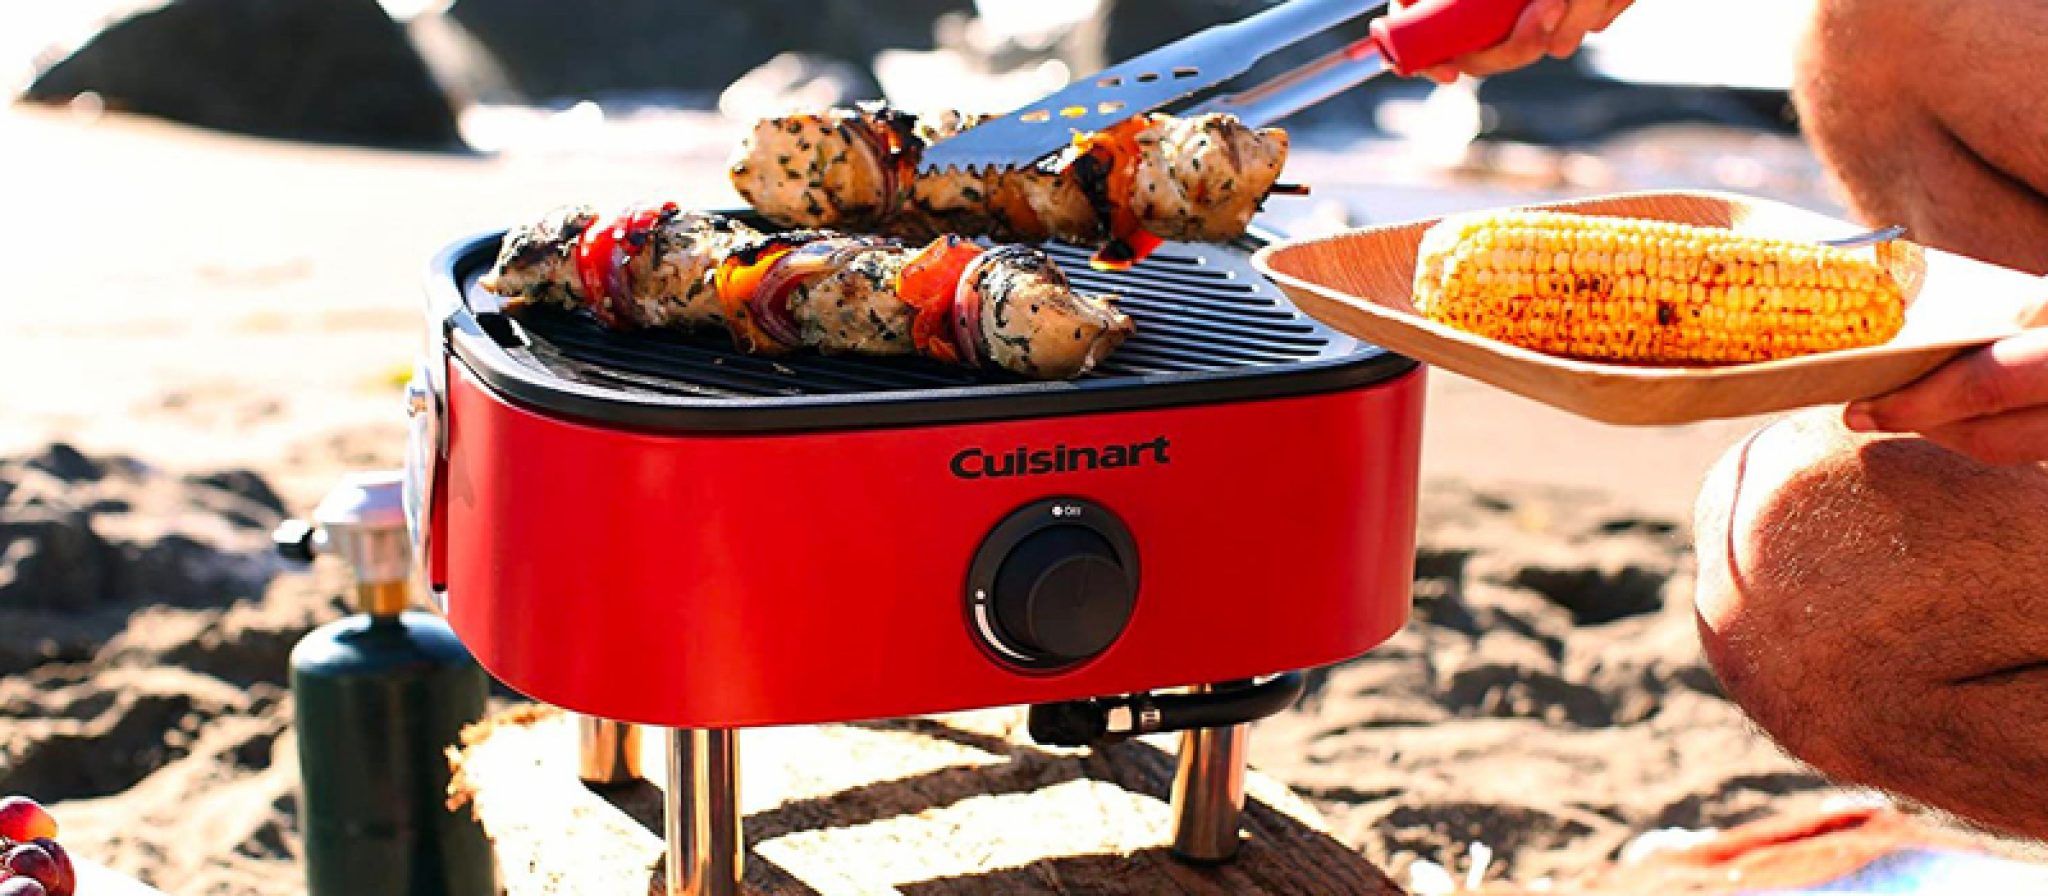 10 Best Small Gas Grills In 2022 (Unbiased Reviews & Buying Guide)